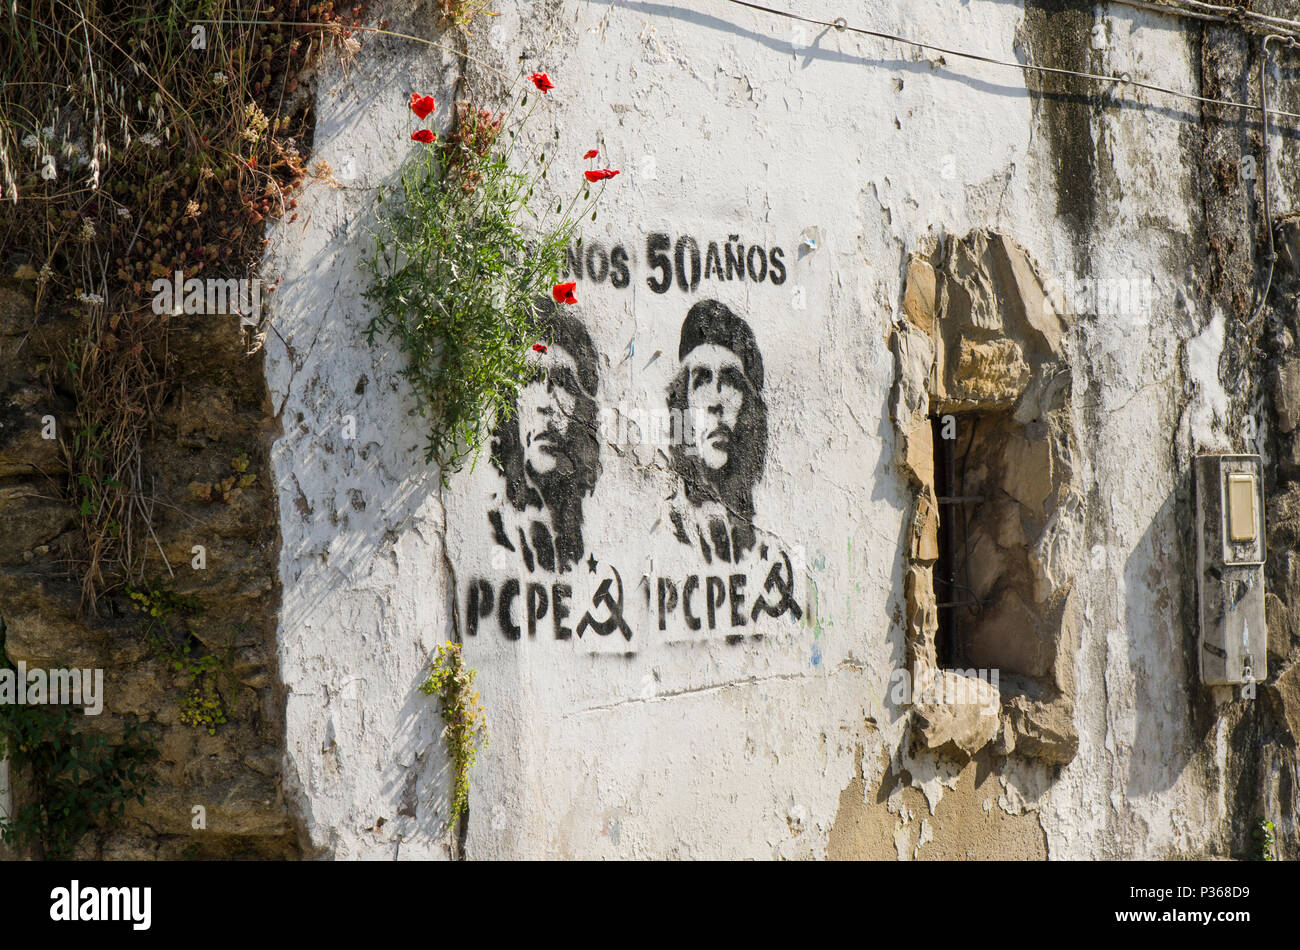 PCPE, andalucia, Signs on wall of communist party of Spain, with che guevara depicted, Andalusia, Spain. Stock Photo